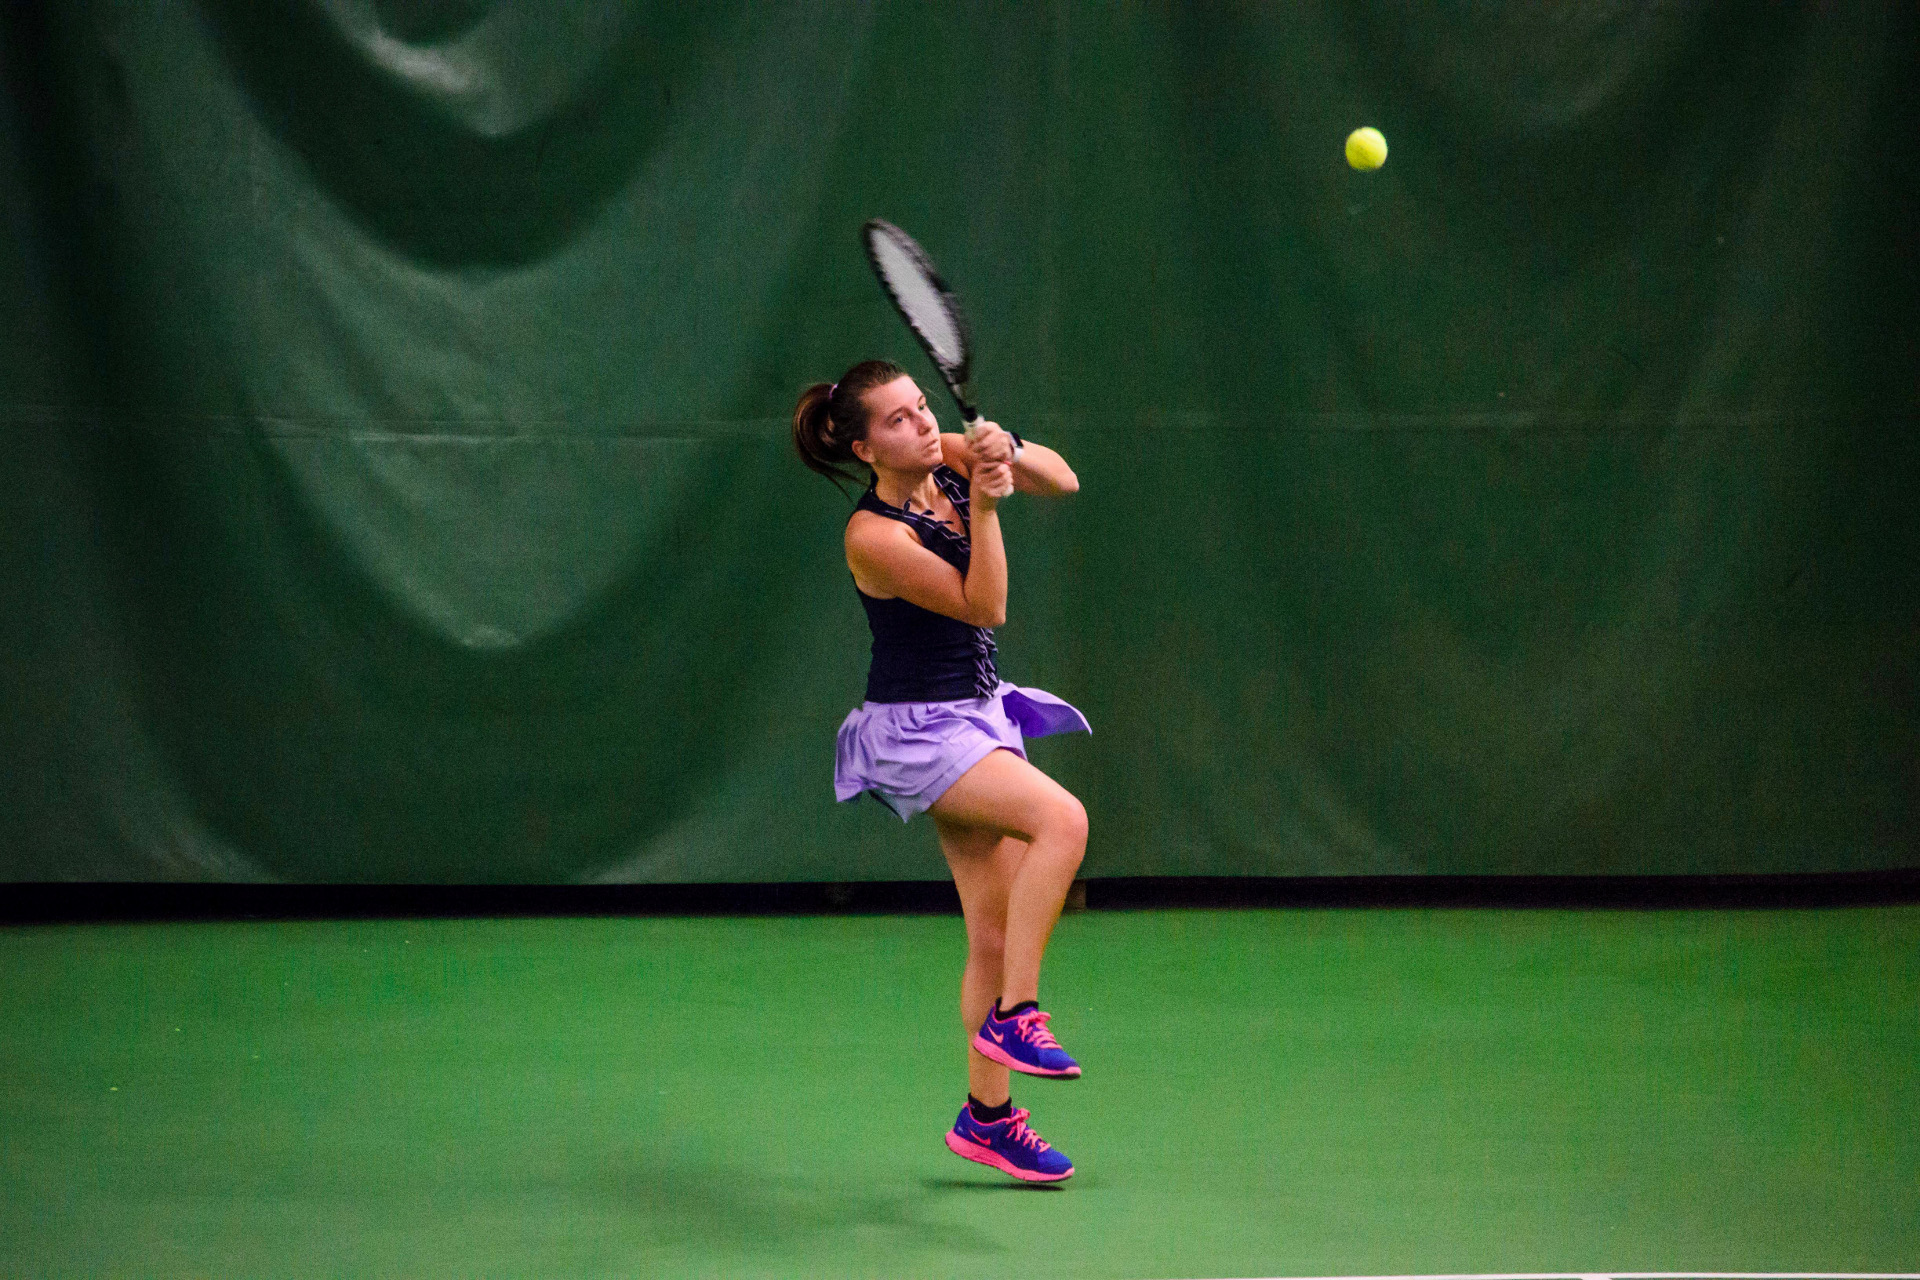 One of Elena's backhands during her first match